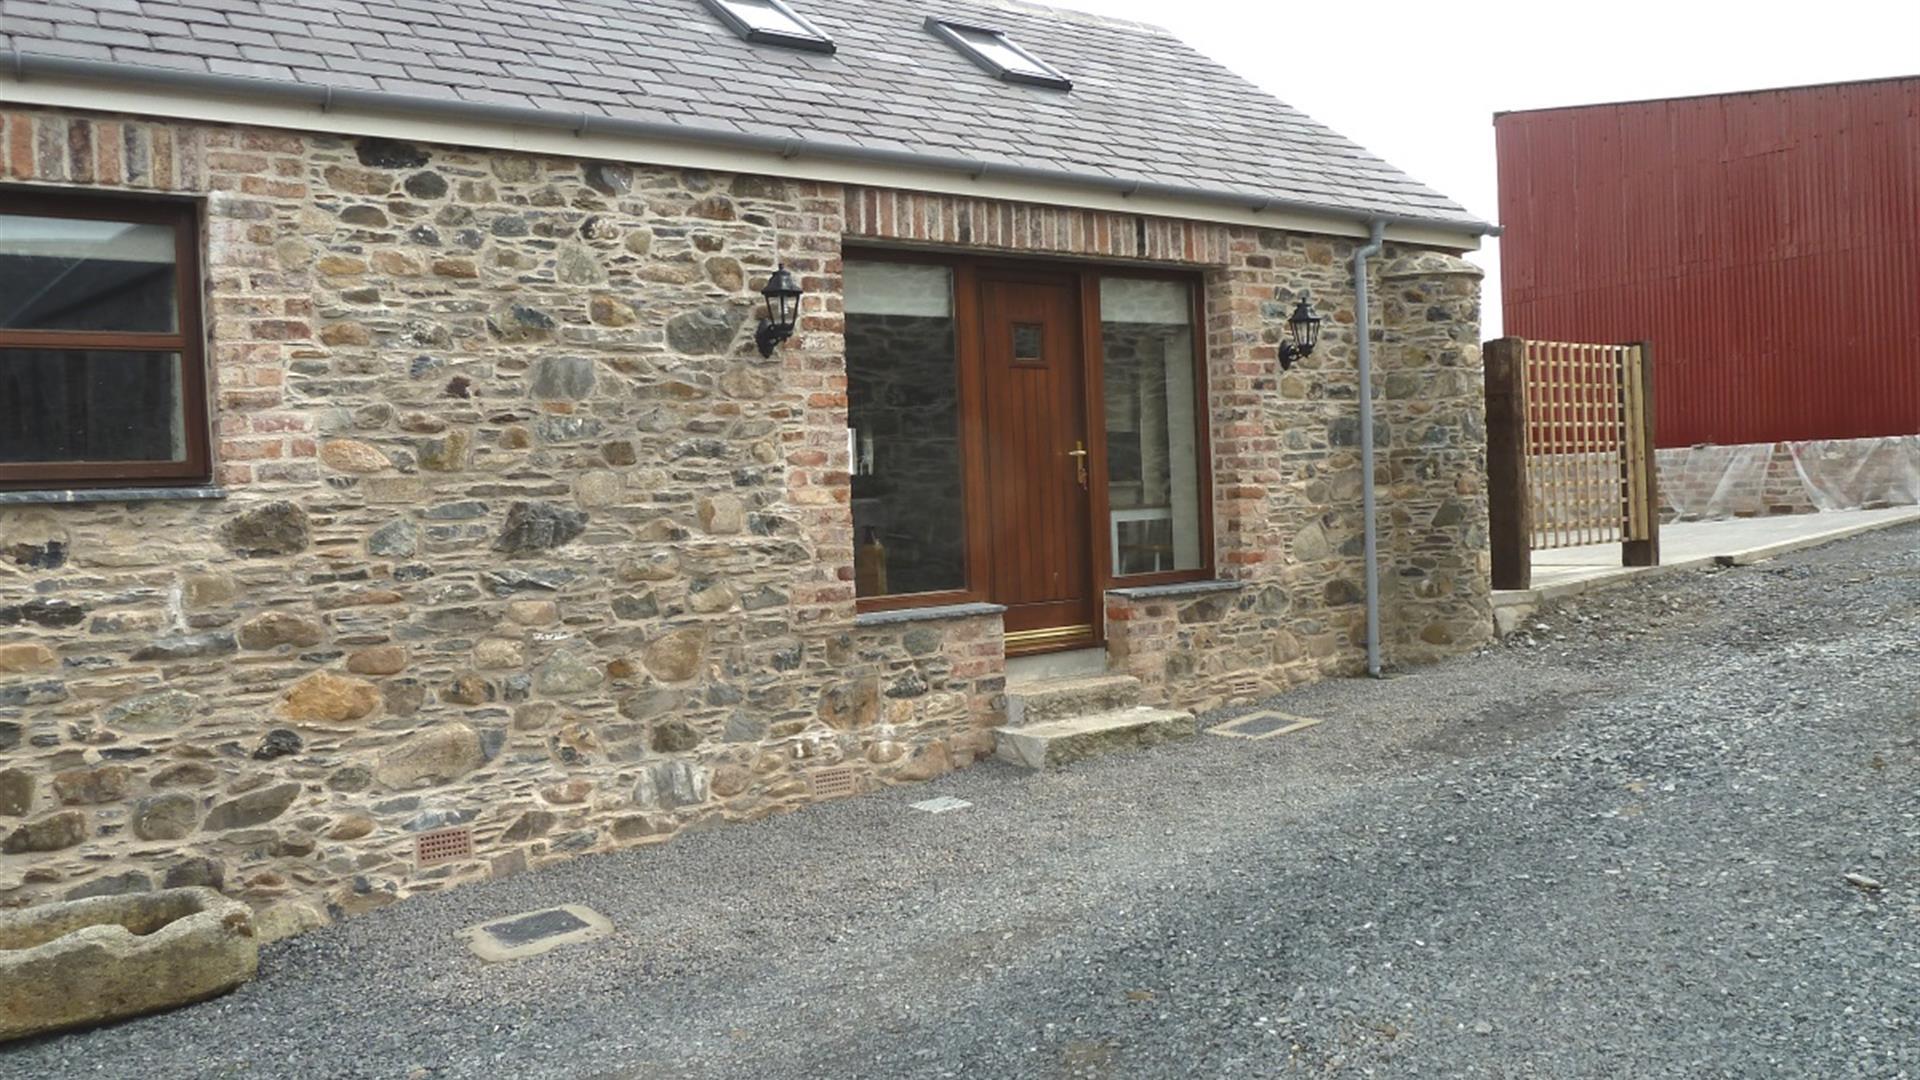 Image shows stone cottage with wooden front door and gravel drive way